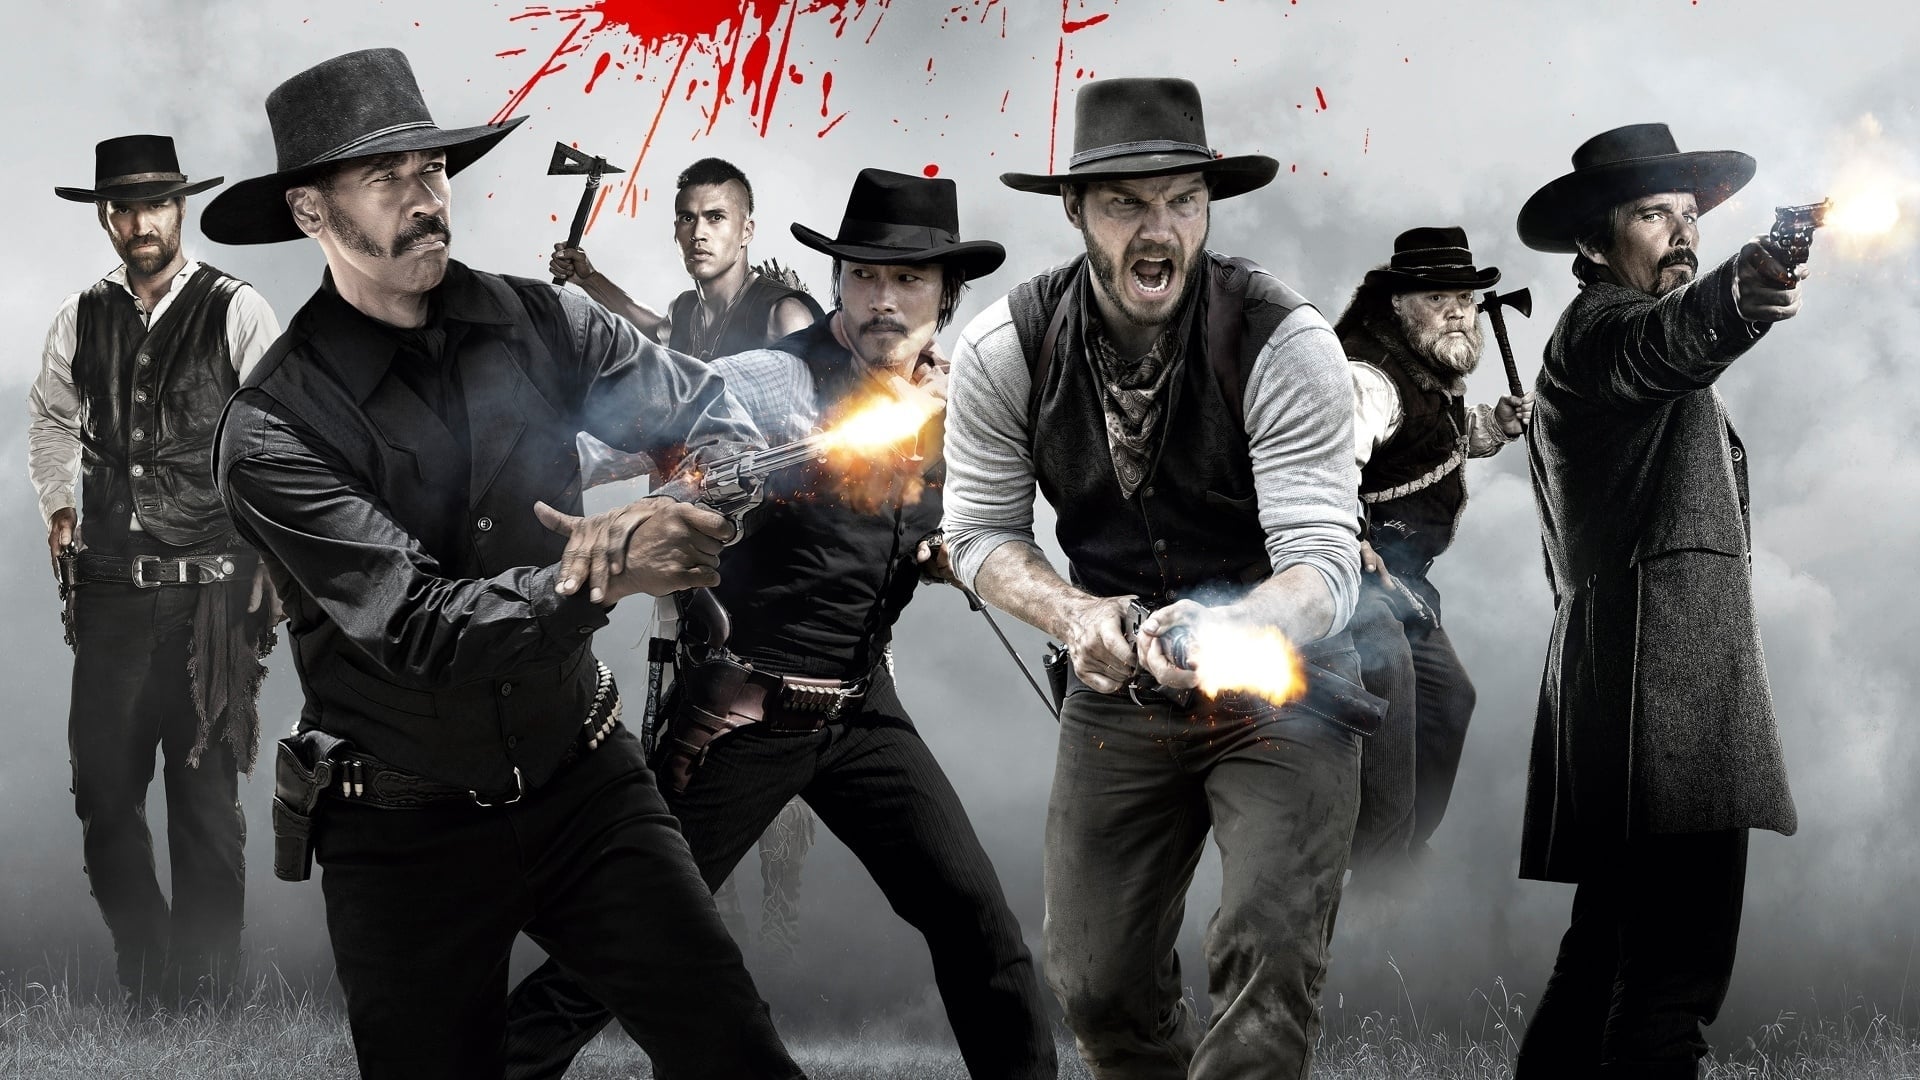 Banner Phim Bảy Tay Súng Huyền Thoại (The Magnificent Seven)